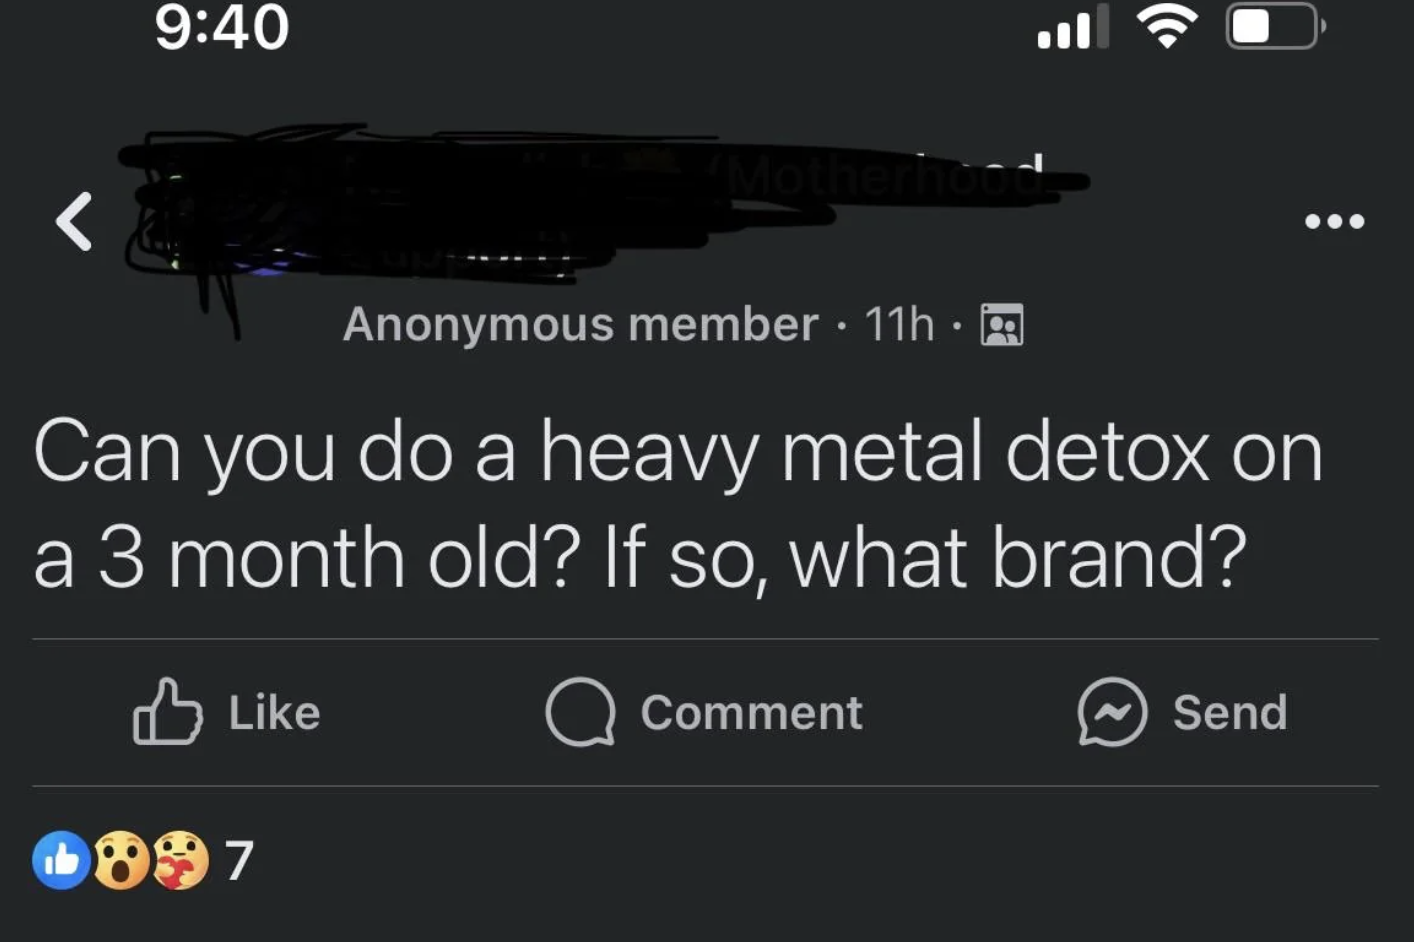 facebook post asking if you can do a heavy metal detox with a 3-month-old